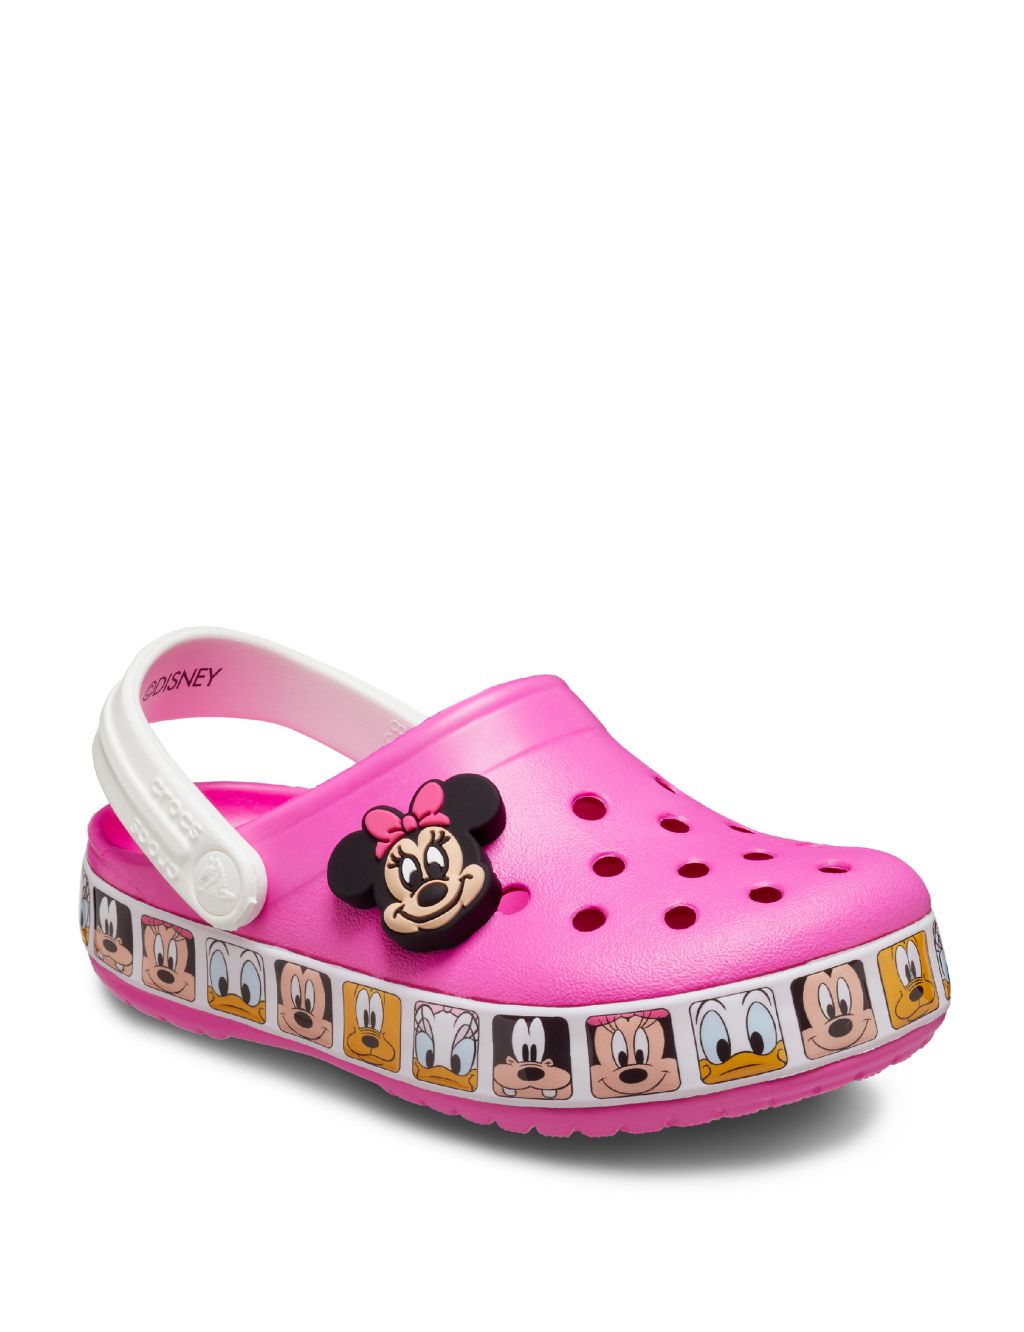 Kids' Minnie Mouse™ Clogs (4 Small - 10 Small) image 2